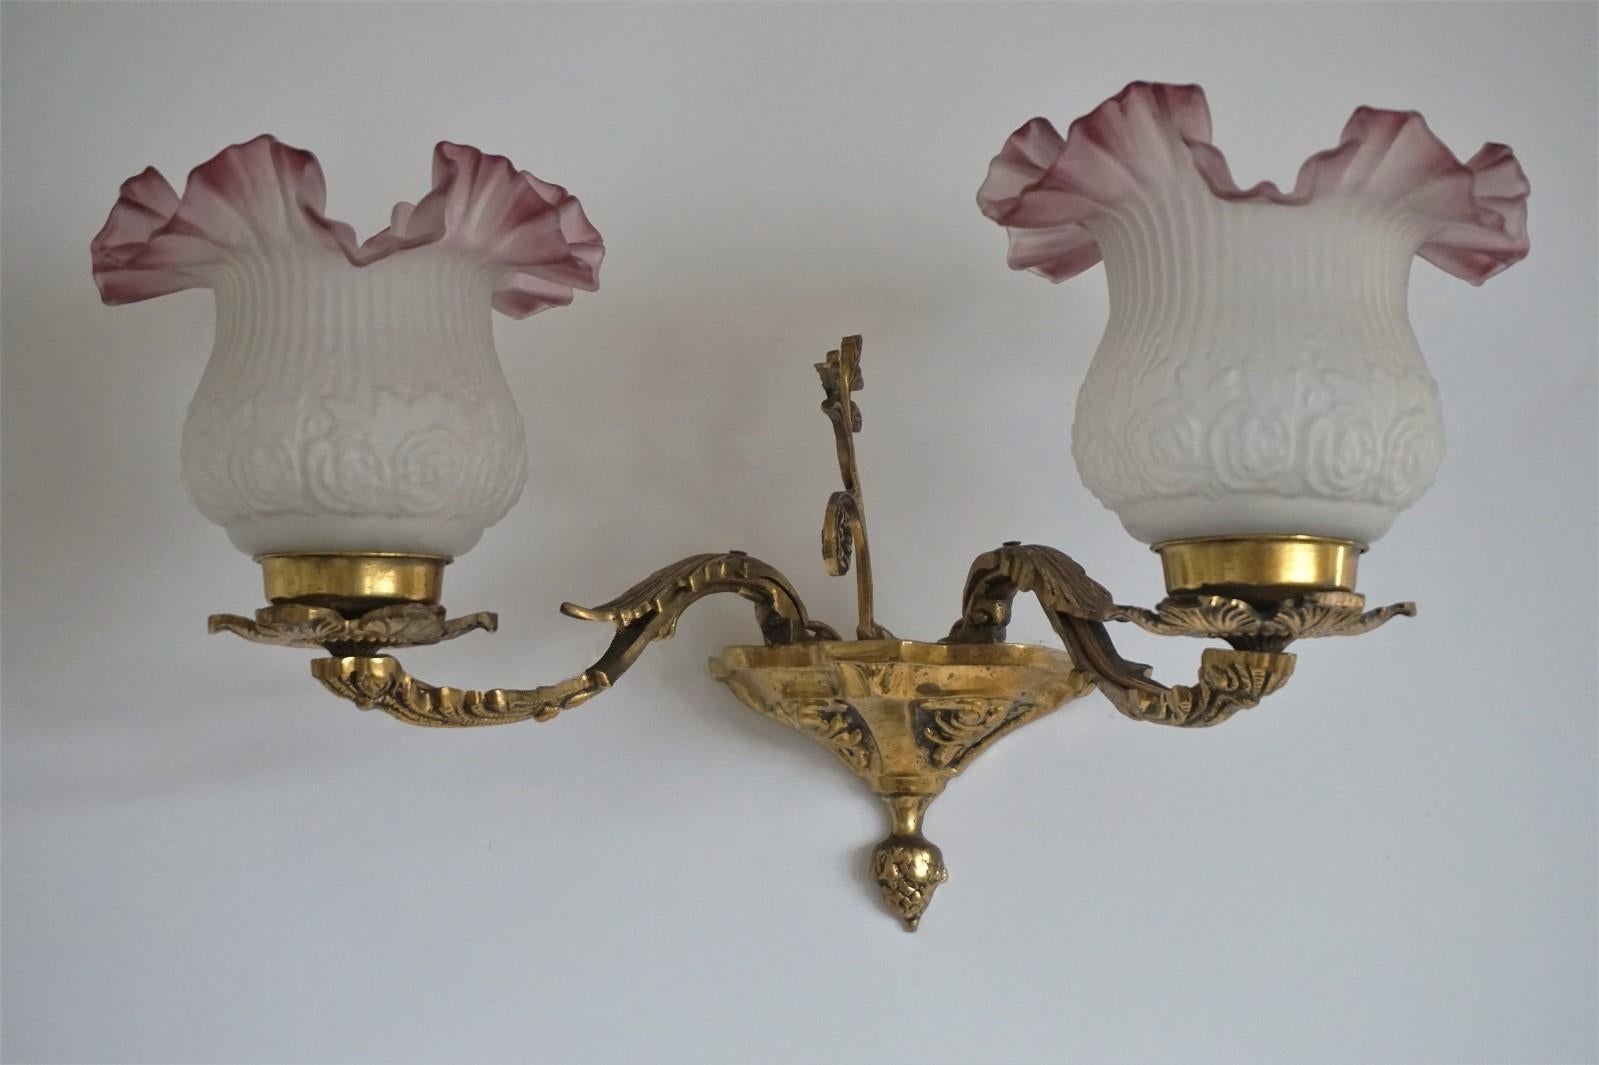 A lovely Art Deco brass two-light wall sconce decorated with foliage, frosted art glass shades, France 1930s.
Very good condition, with wonderful patina, rewired
Measures:
Width: 18.50 in (47 cm)
Height: 11 in (28 cm)
Depth: 10.75 in (27